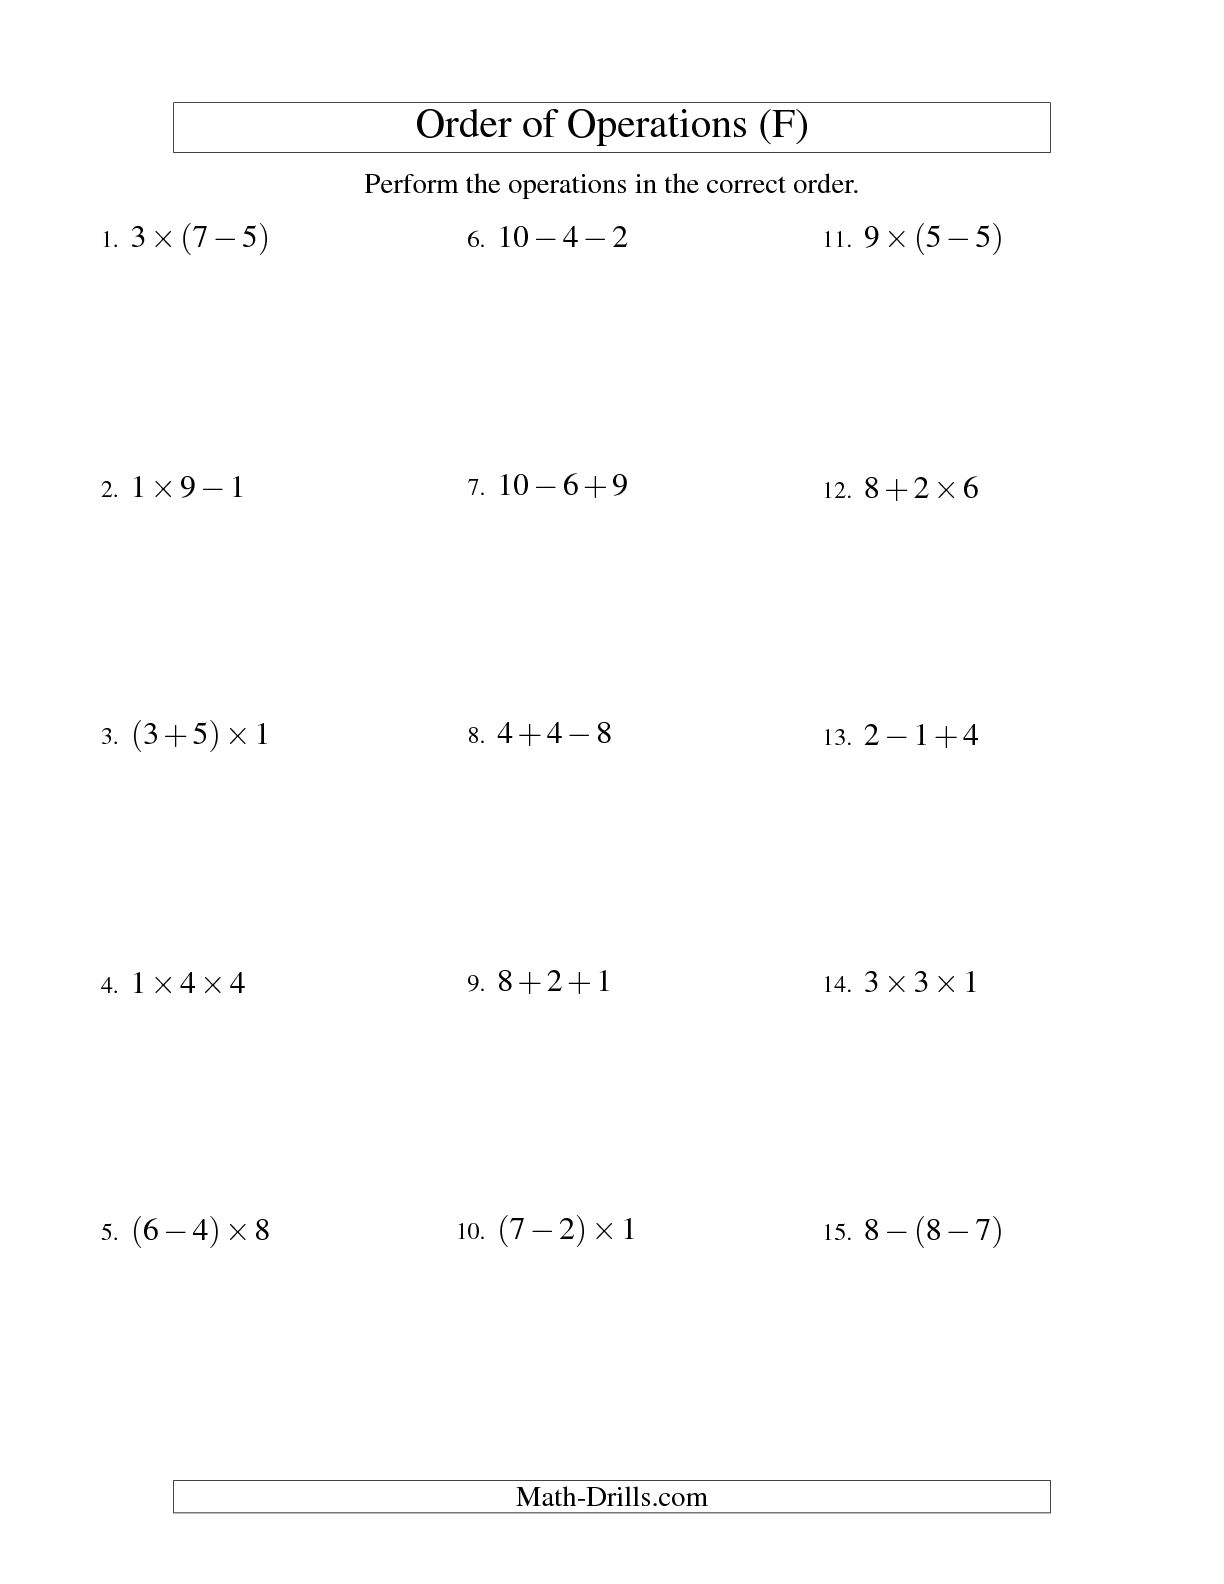 Adding and Subtracting Integers Worksheet Image